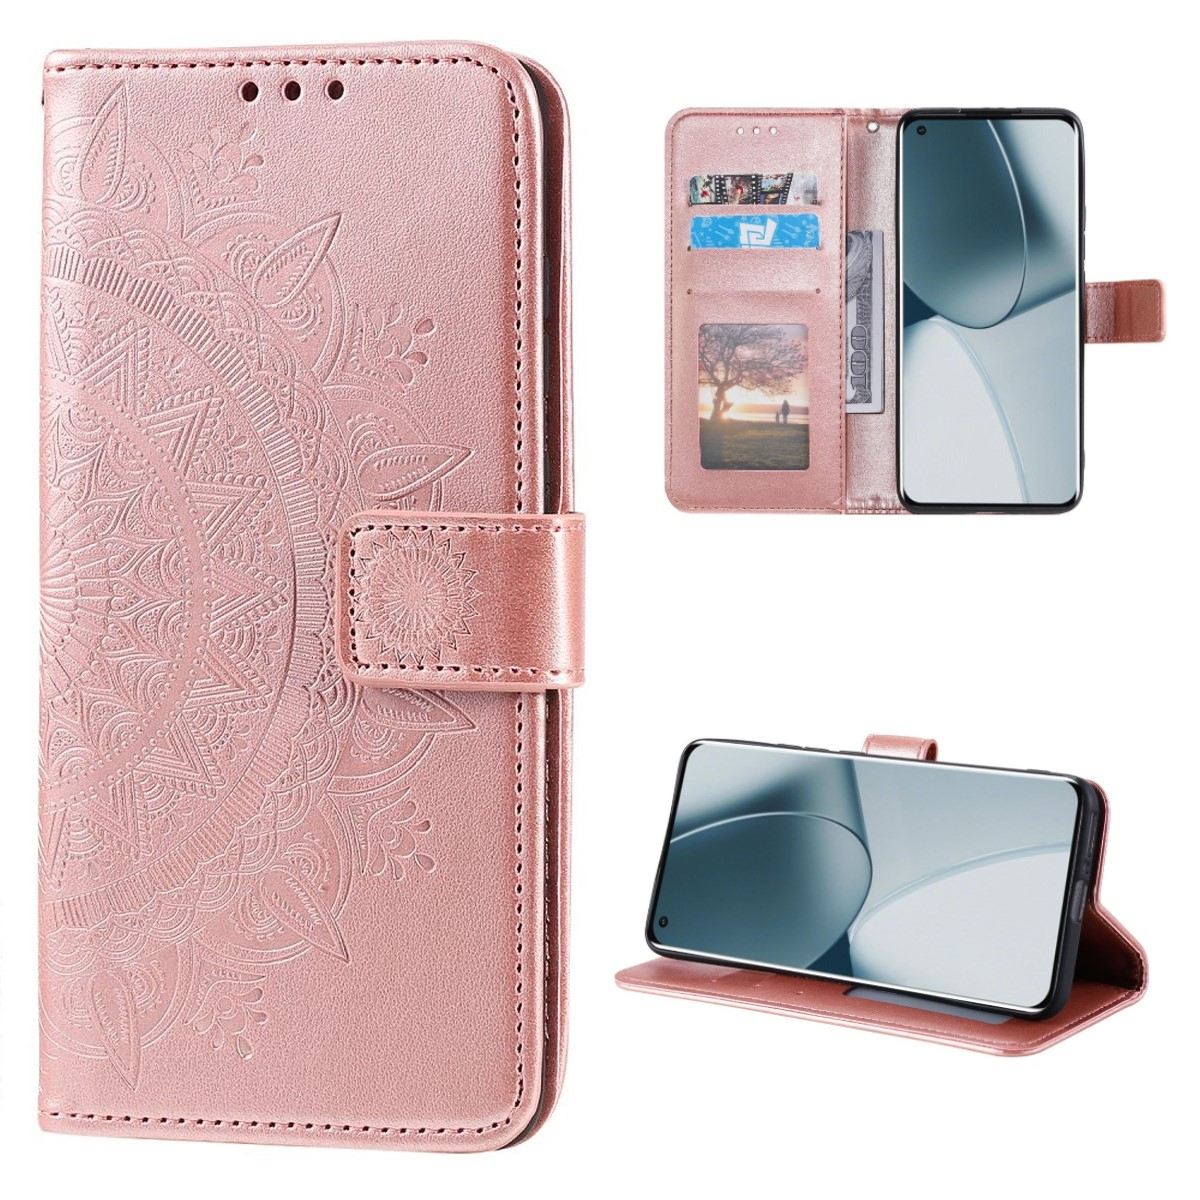 Pro Klapphülle Rosegold 5G, Muster, Bookcover, OnePlus, Mandala COVERKINGZ 10 mit